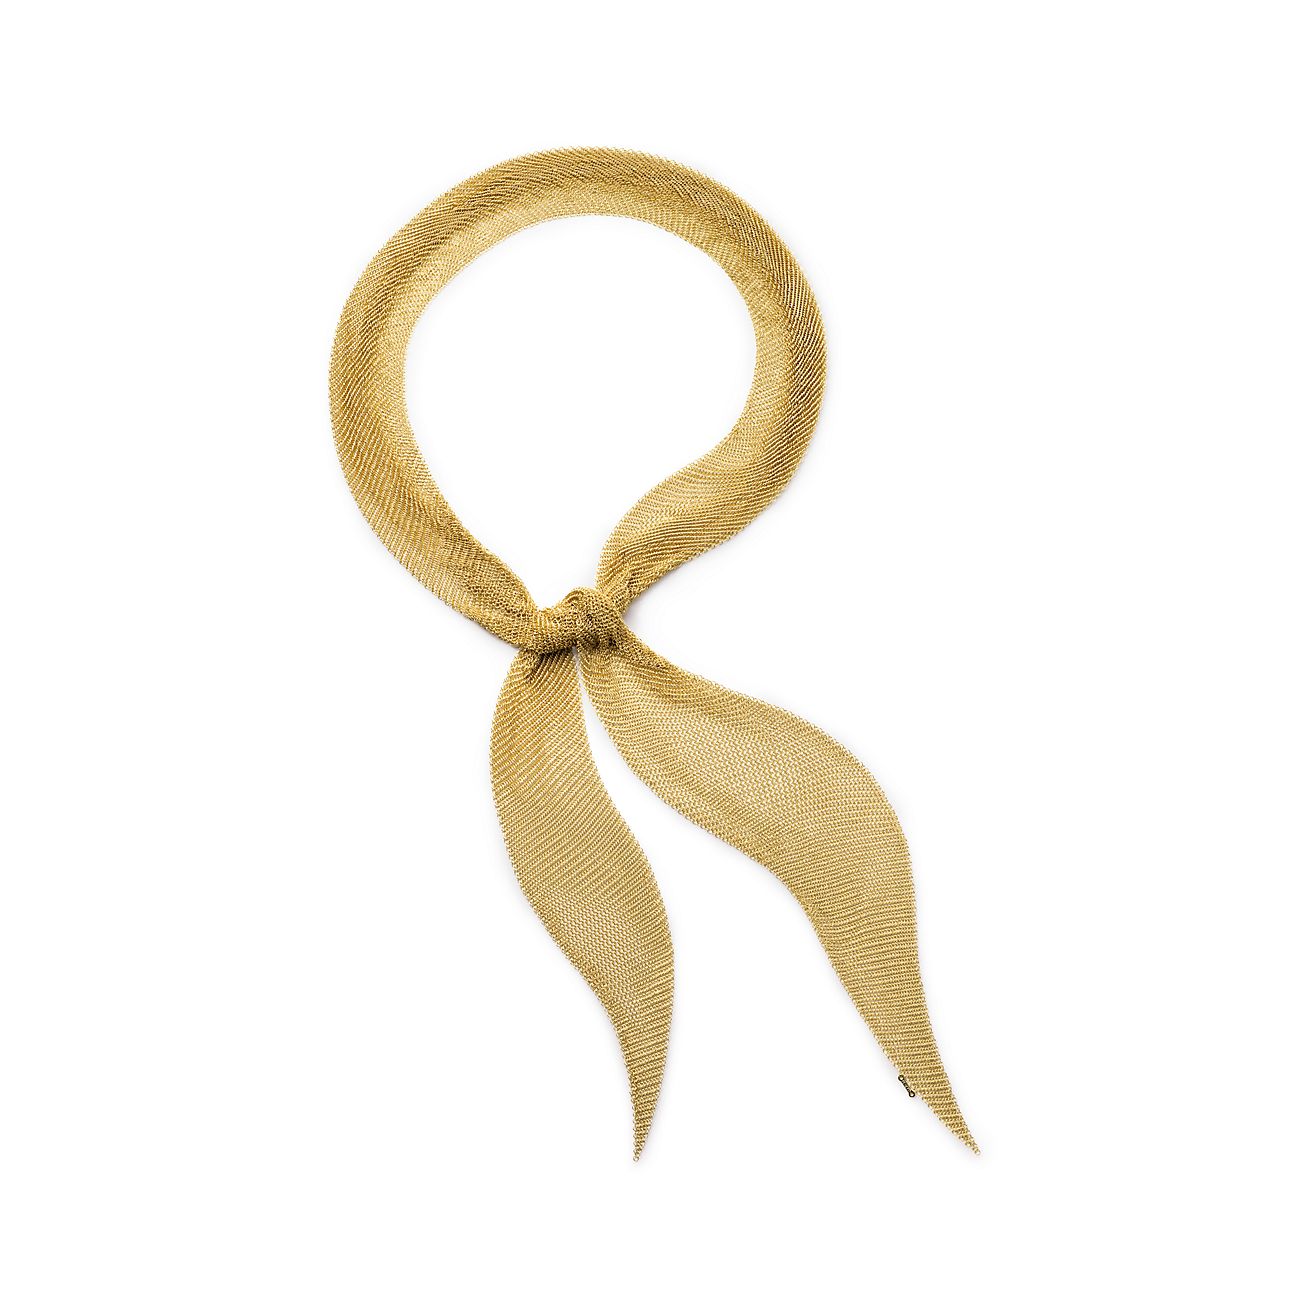 Sold at Auction: Elsa Peretti for Tiffany & Co., 18K Scarf Necklace